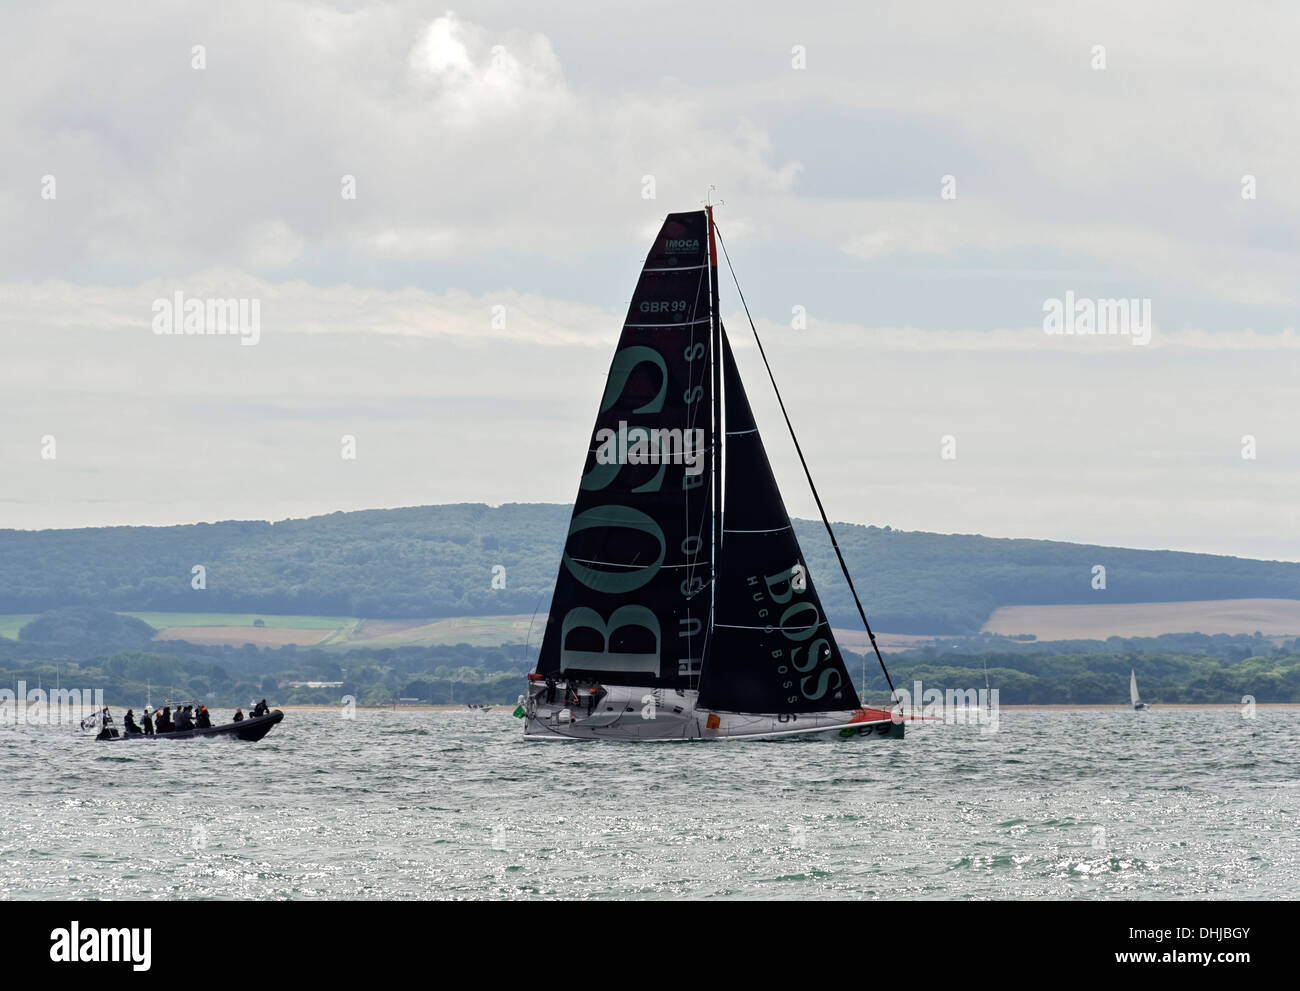 Fastnet yacht race 2013. Racing yacht sailing down the Solent after the start from Cowes. Competing Transat Jacques Vabre 2013. Stock Photo